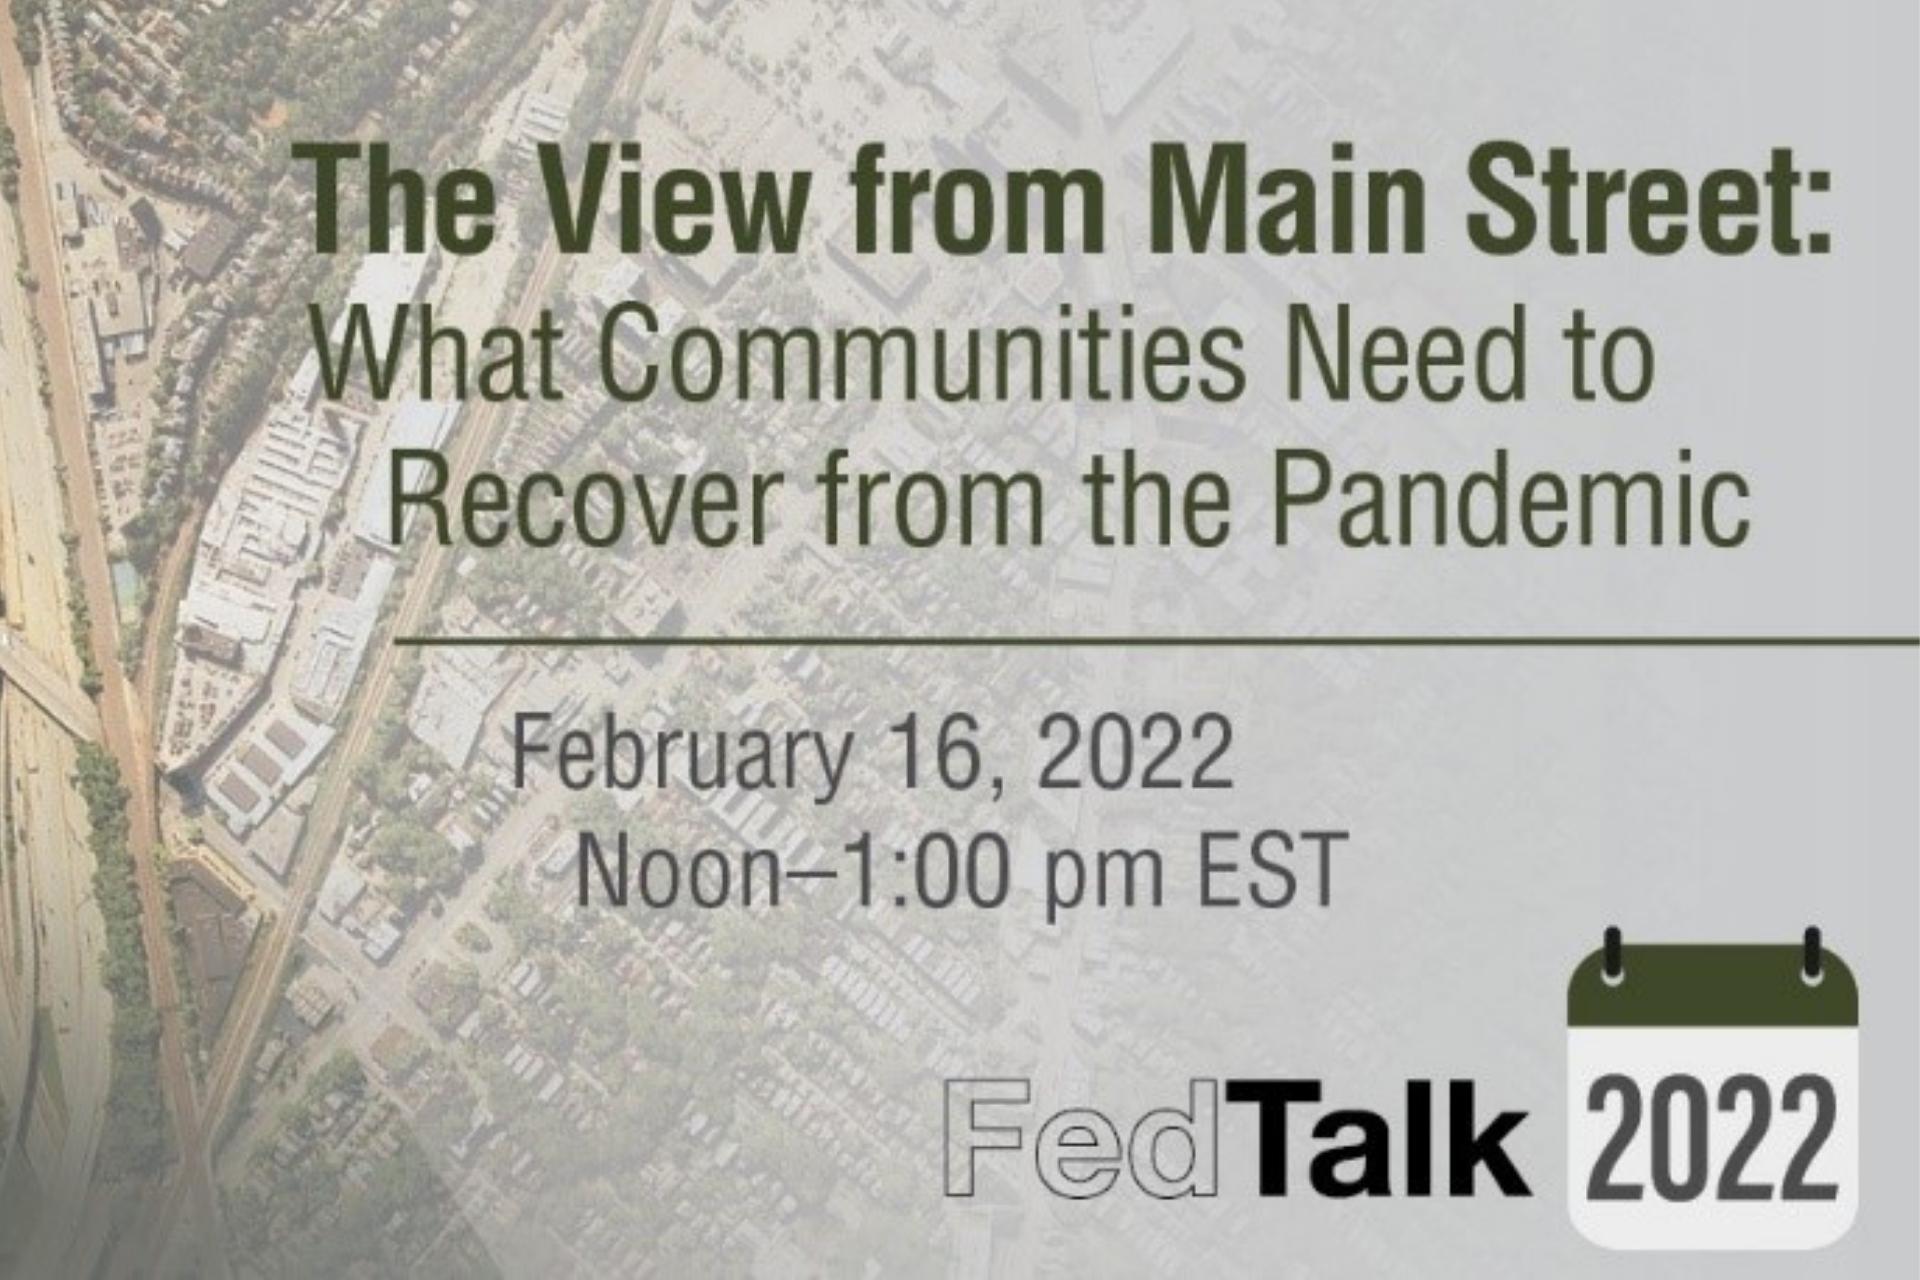 View from Main Street: What Communities Need to Recover from the Pandemic